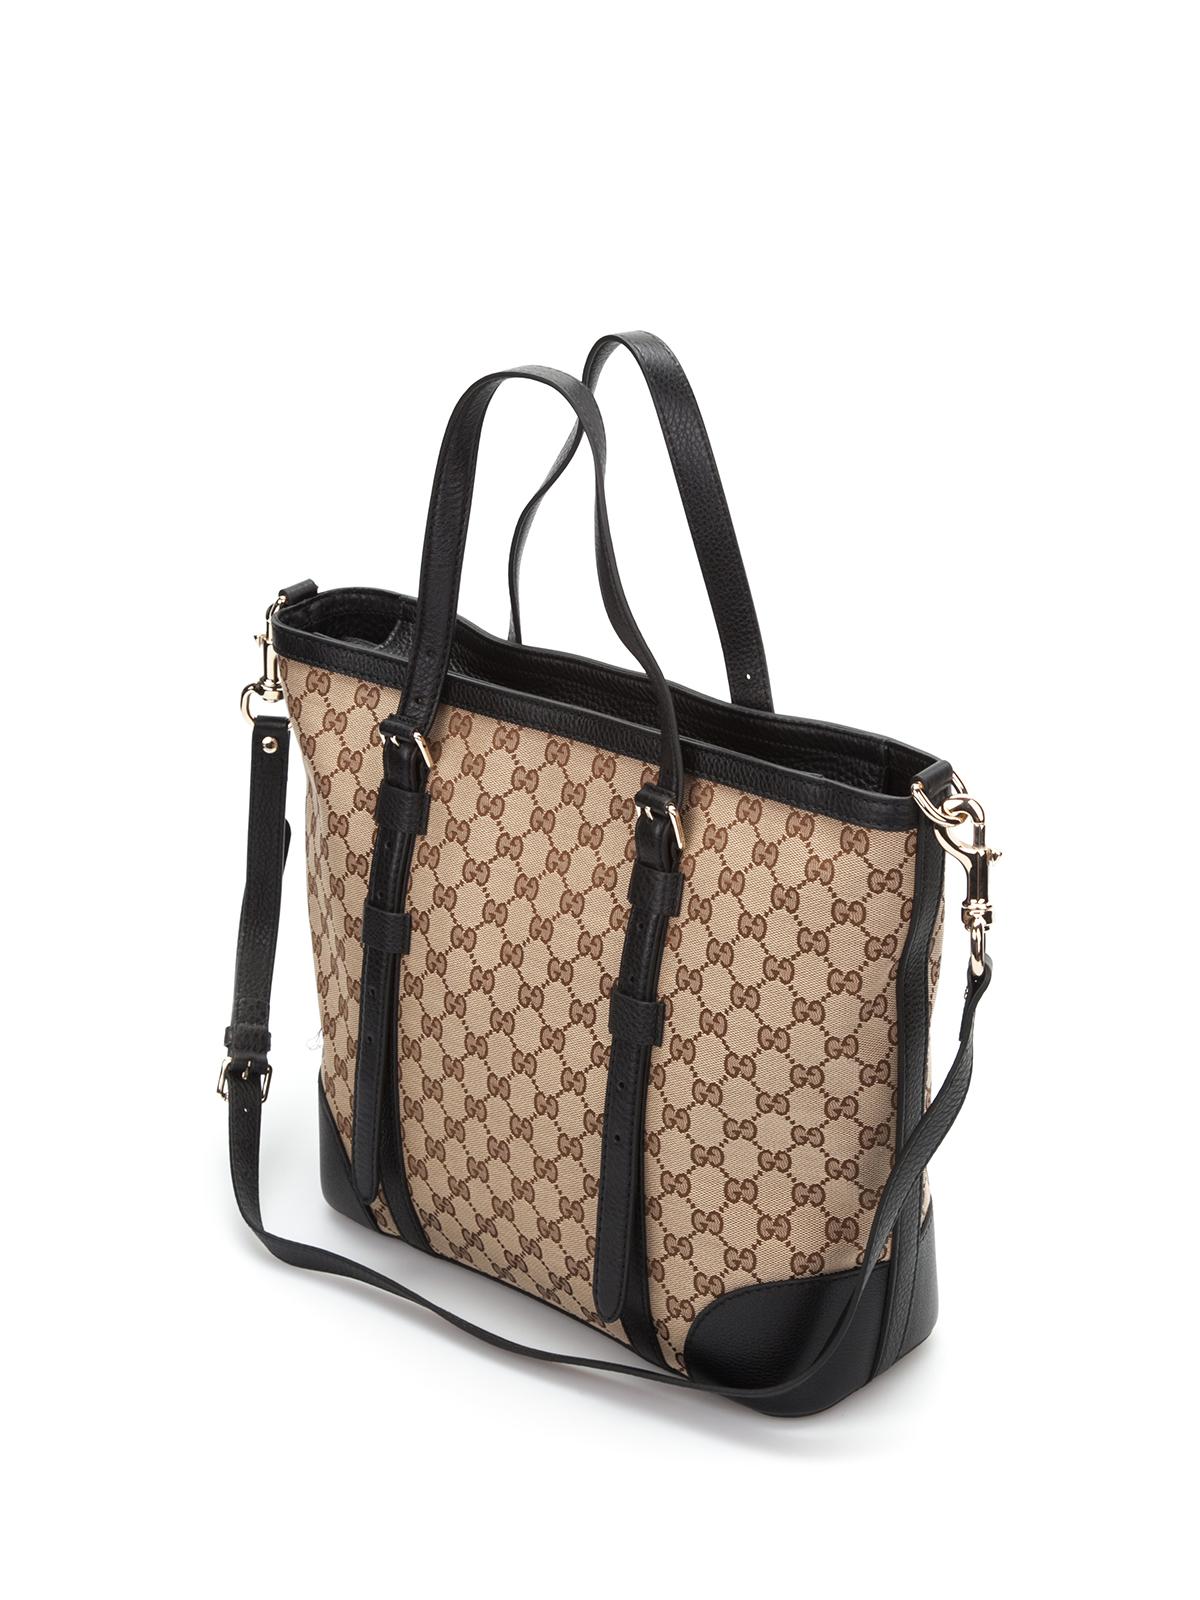 Gucci - GG classic tote - totes bags - 387602KQW1G9769 | www.bagssaleusa.com/product-category/classic-bags/